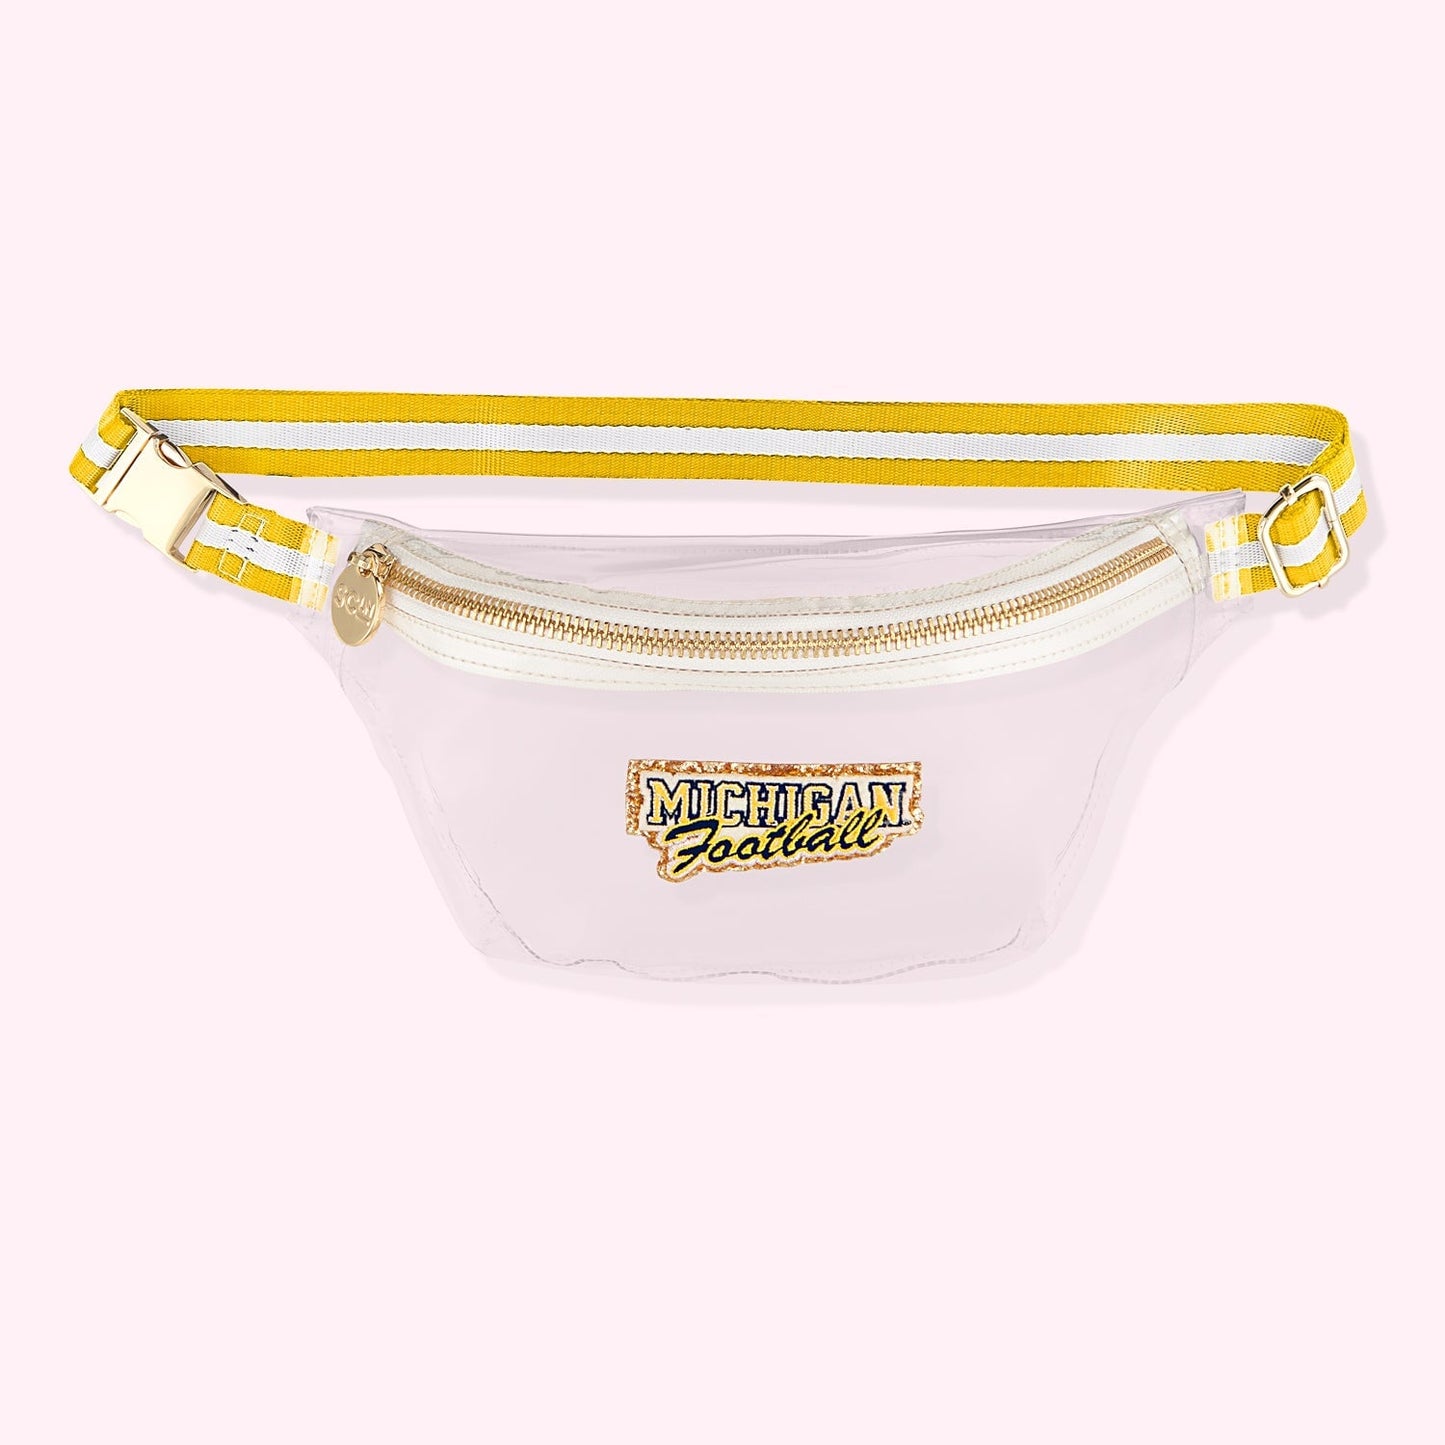 University of Michigan Clear Fanny Pack